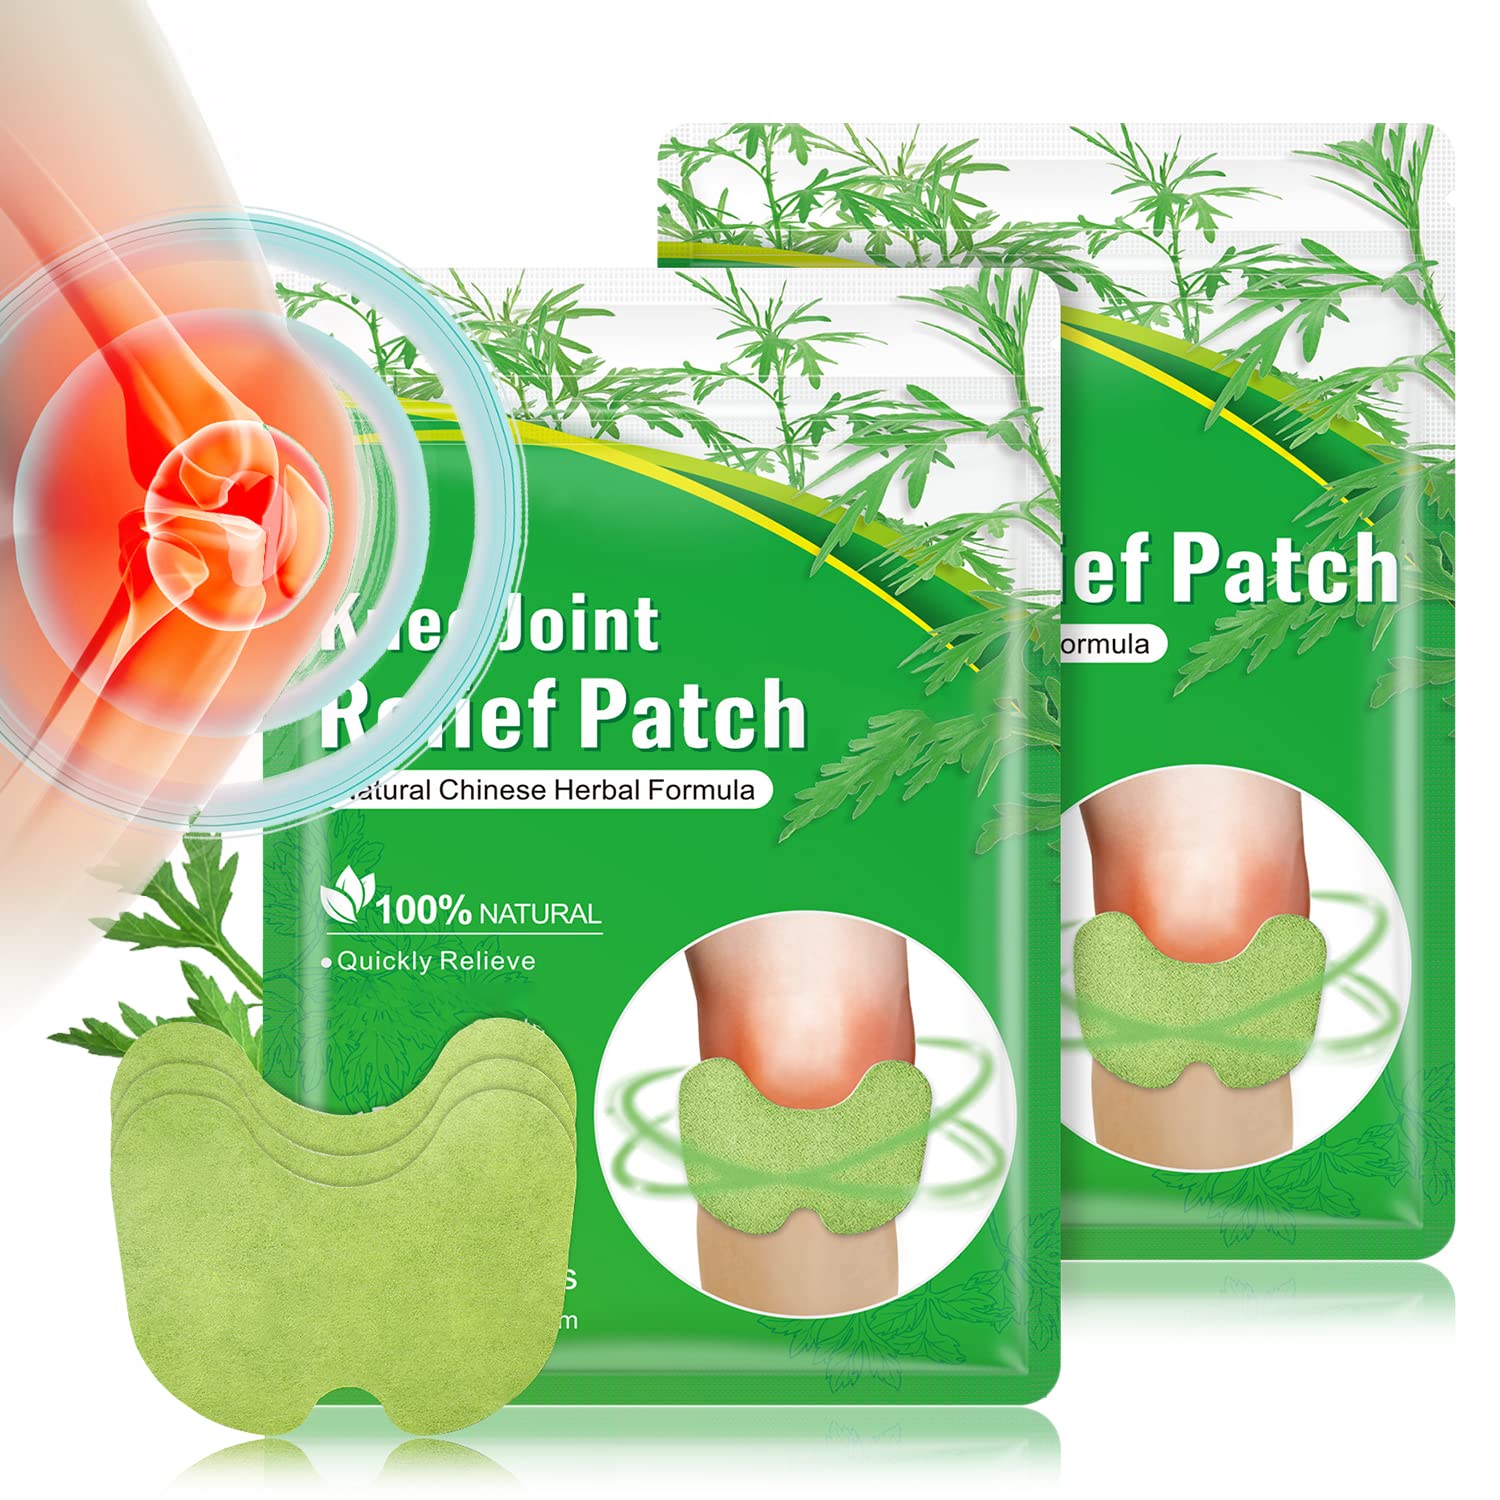 24PCS Flexiknee Natural Knee Pain Patch, Knee Joint Pain Relief Patch USA  FAST